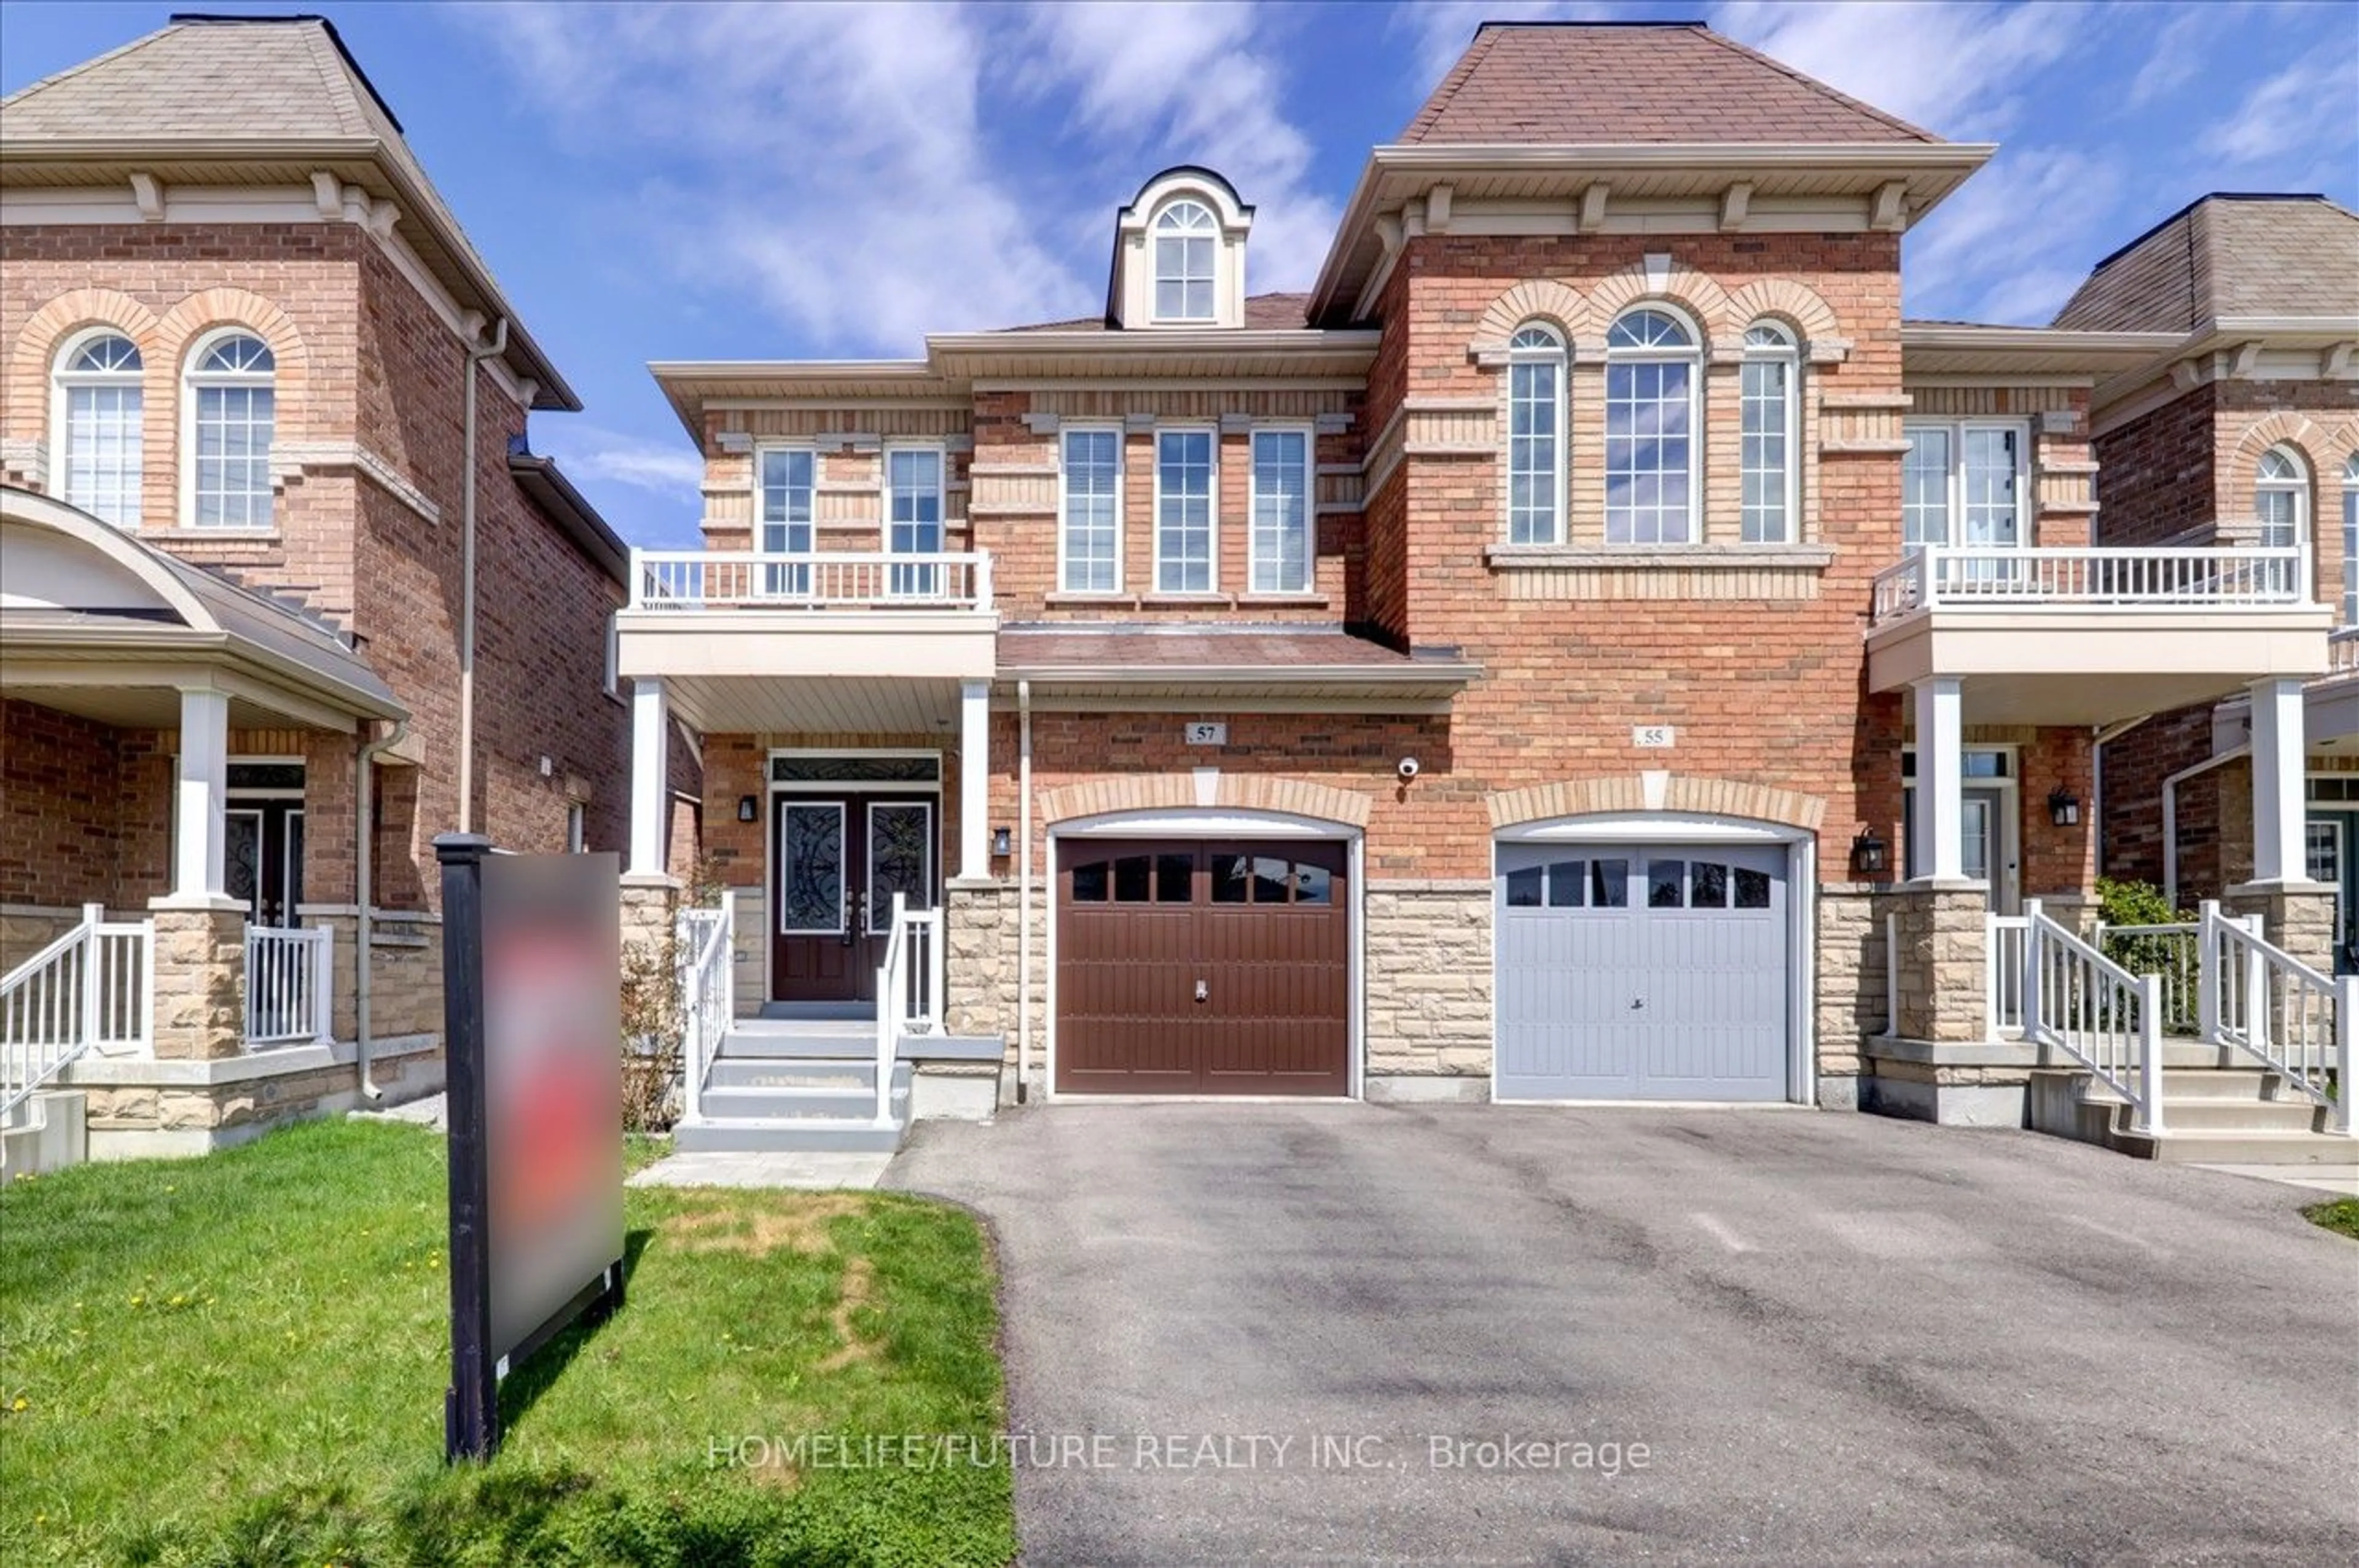 Home with brick exterior material for 57 Turnhouse Cres, Markham Ontario L6B 0S6